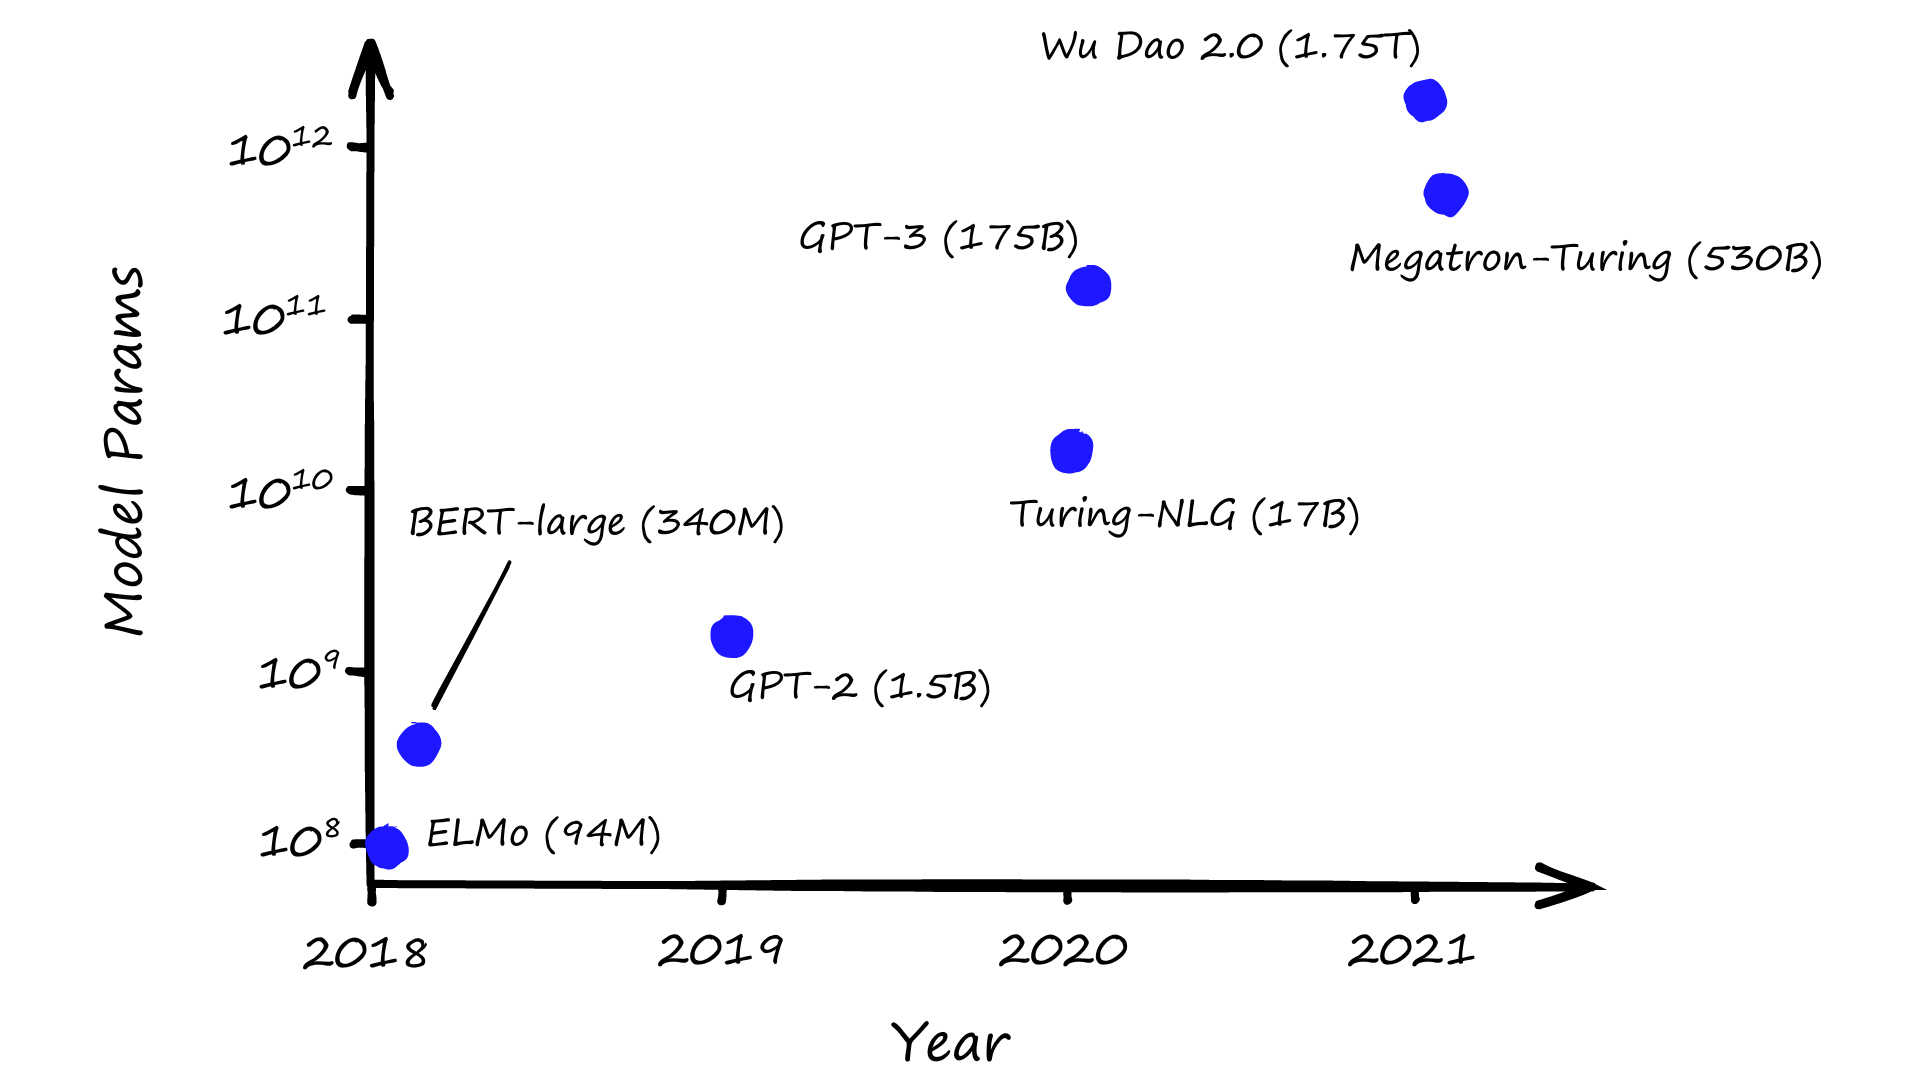 Model parameters over time, note the y-axis is using a log-scale.